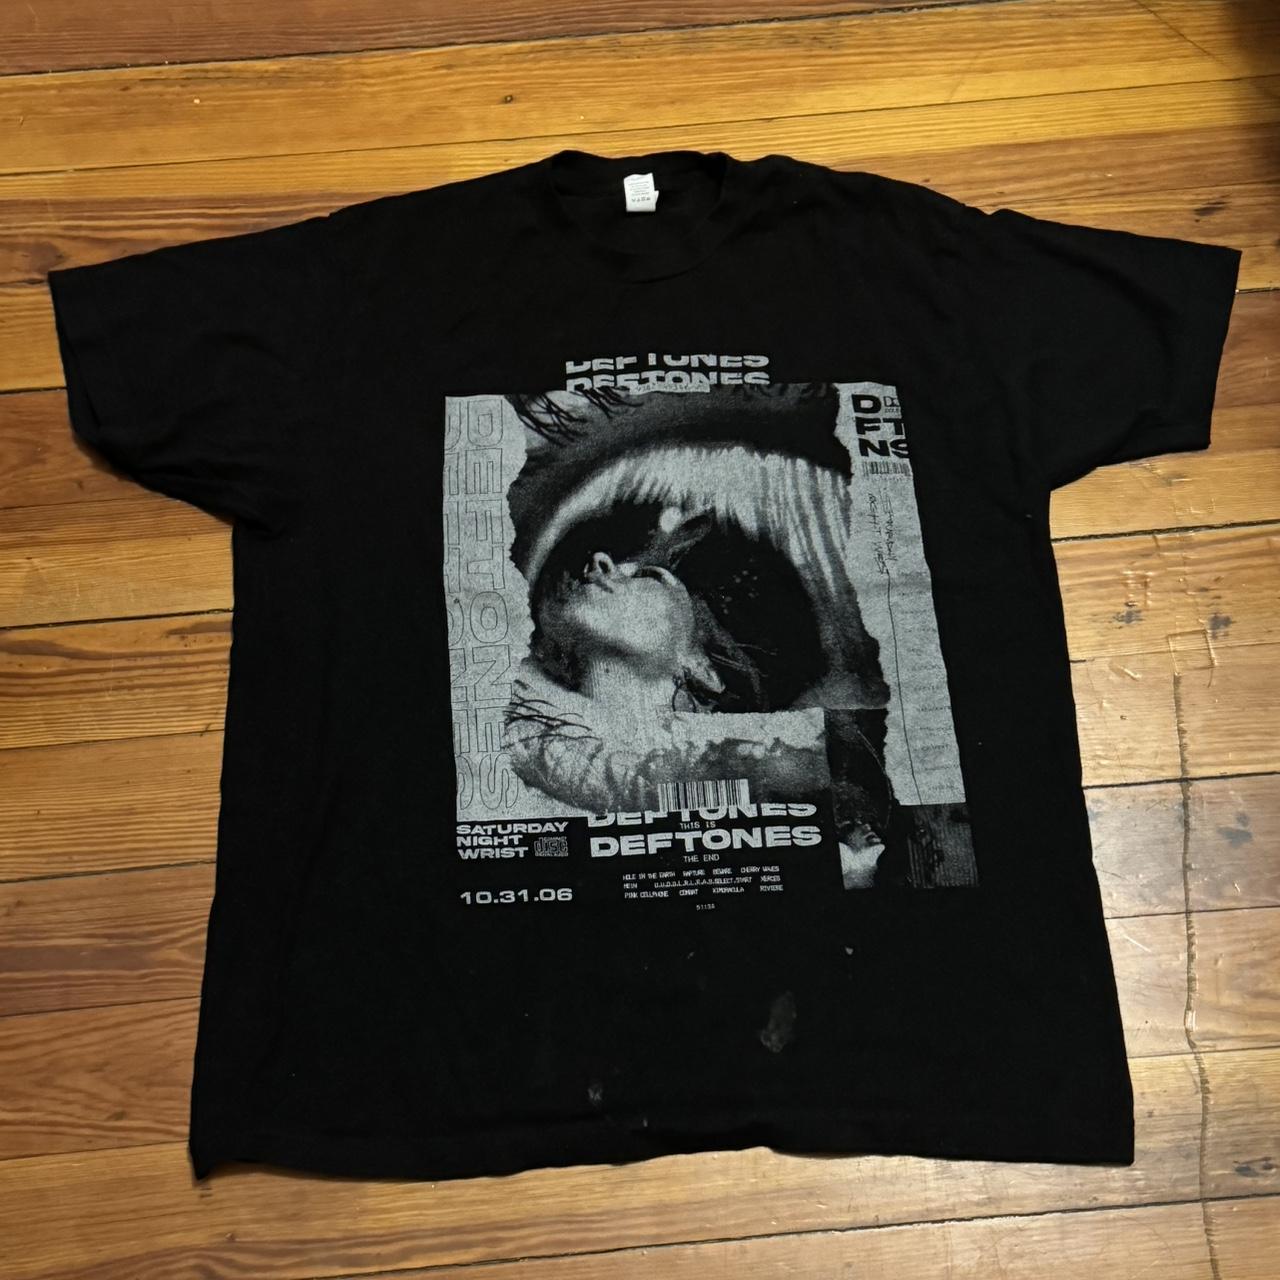 DEFTONES T SHIRT -there is a stain but it comes out - Depop